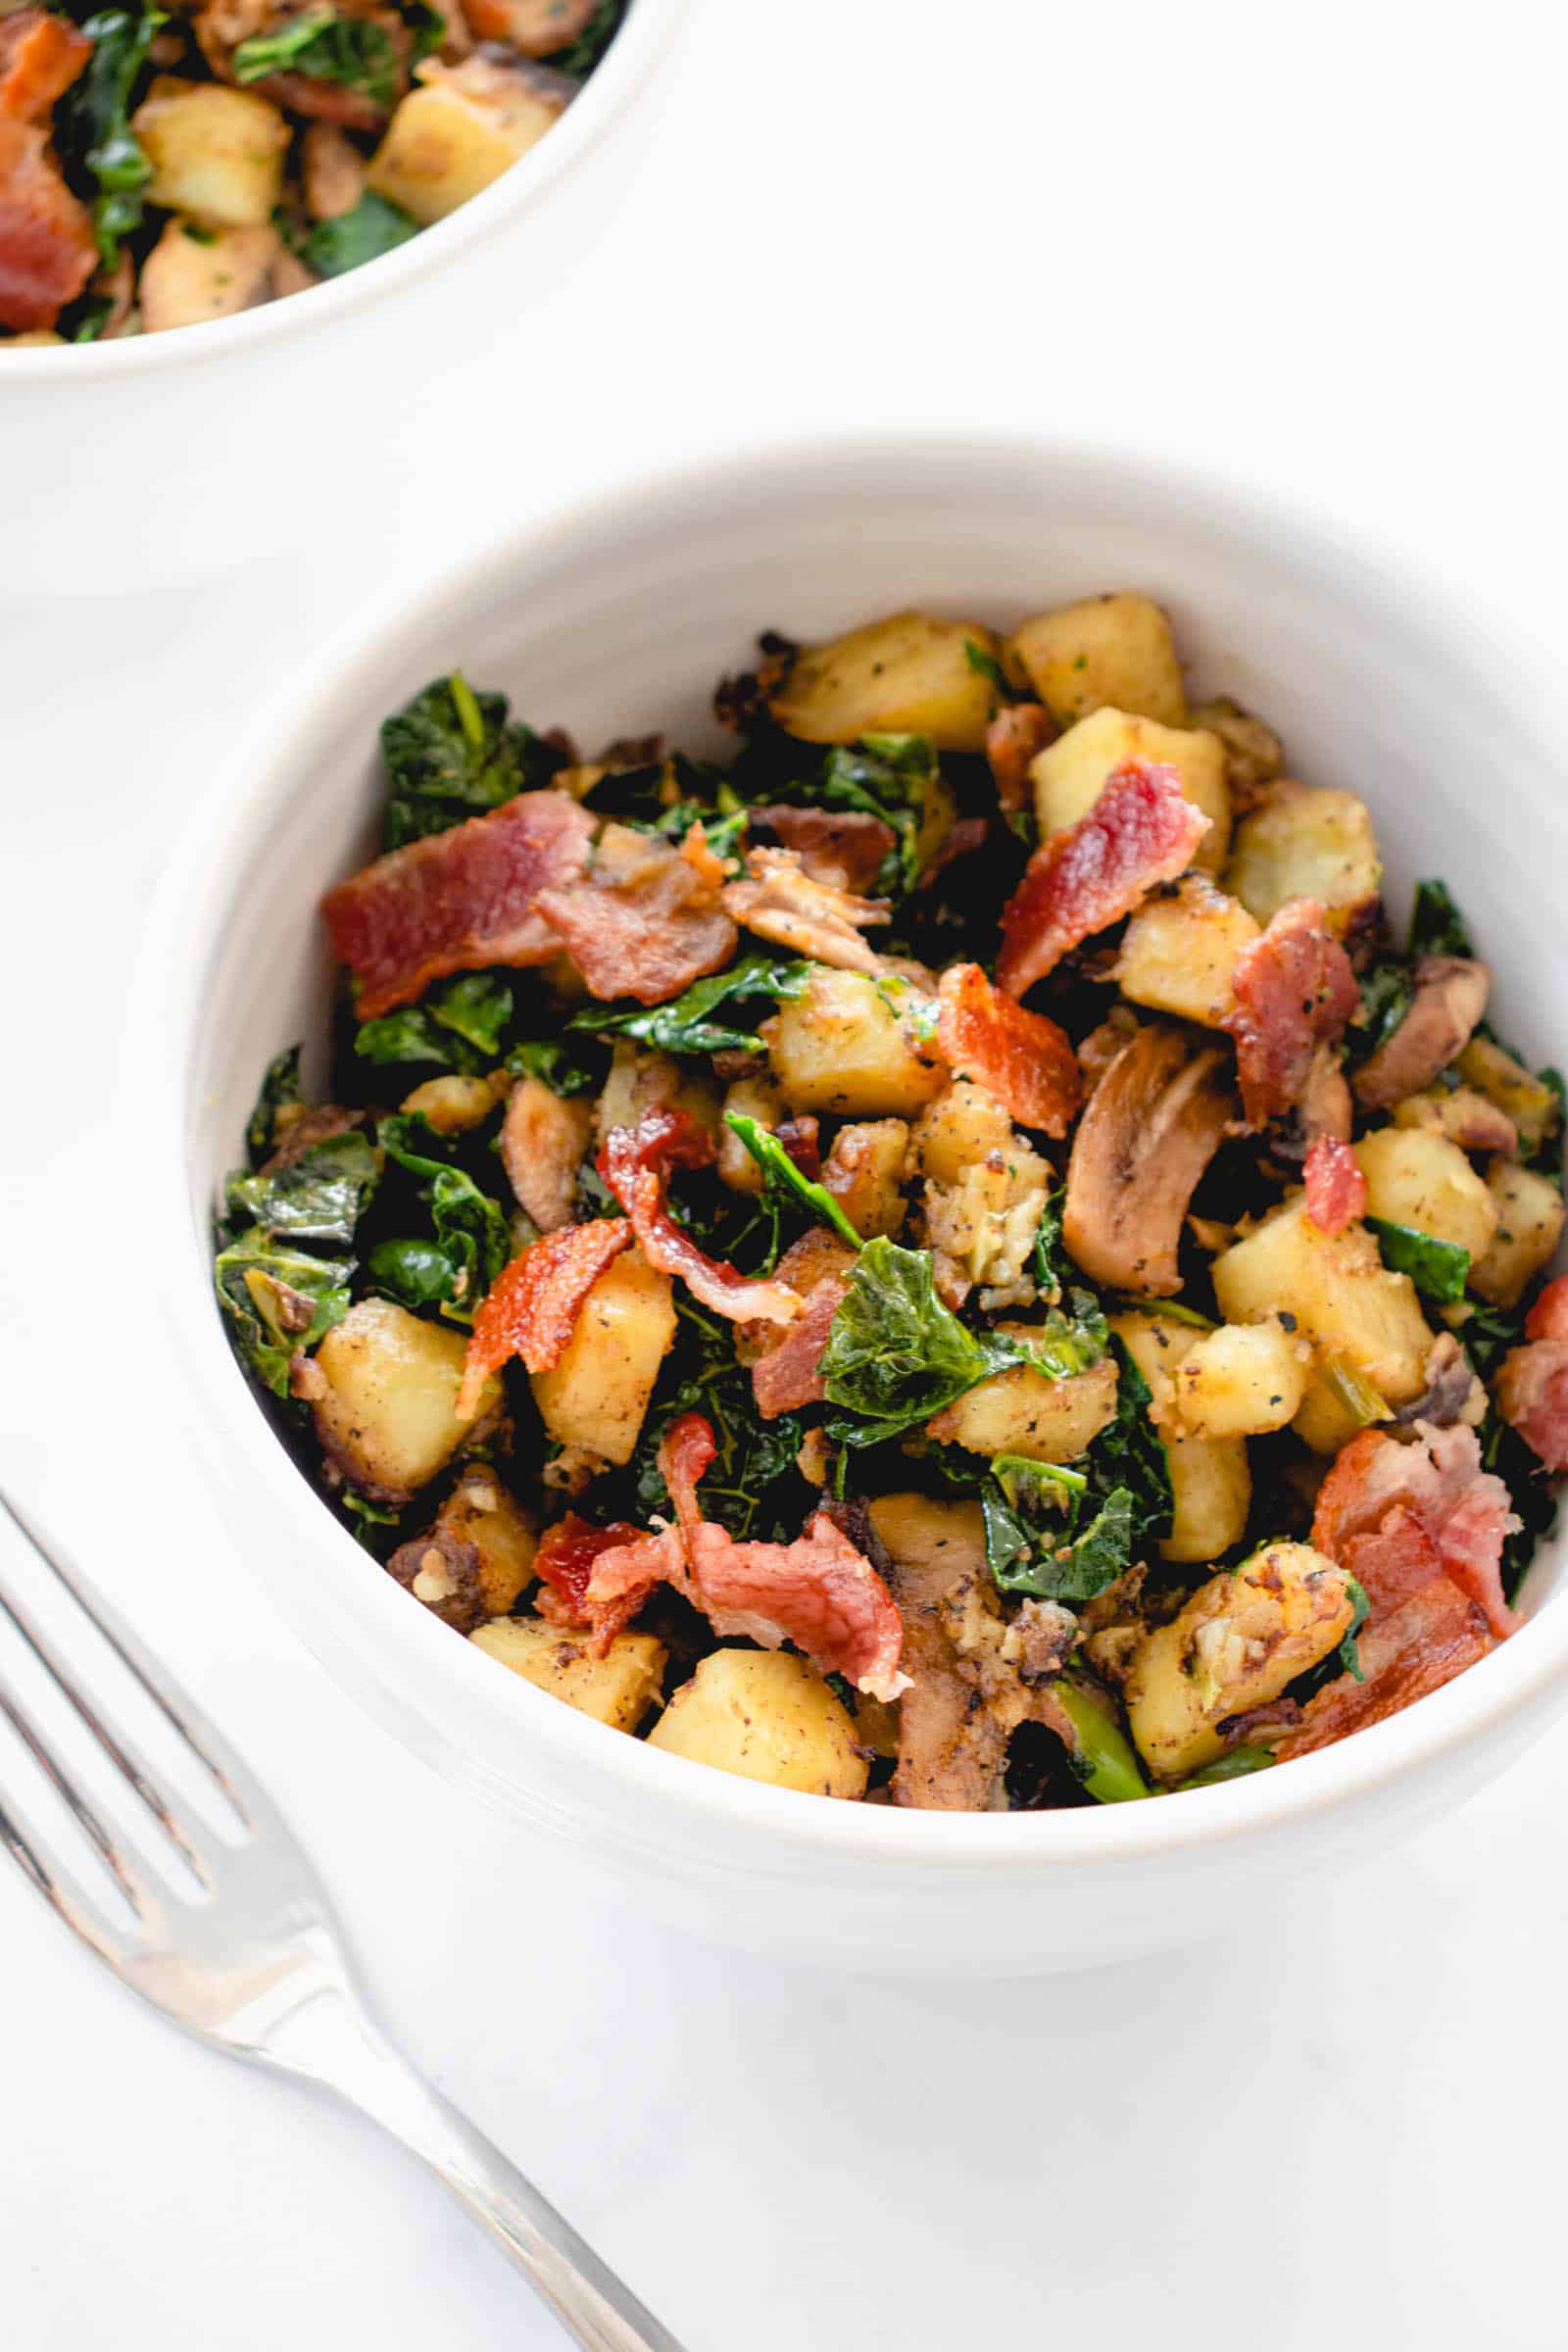 https://healmedelicious.com/wp-content/uploads/2022/03/AIP-Sweet-Potato-Hash-with-Bacon-and-Kale-1.jpg